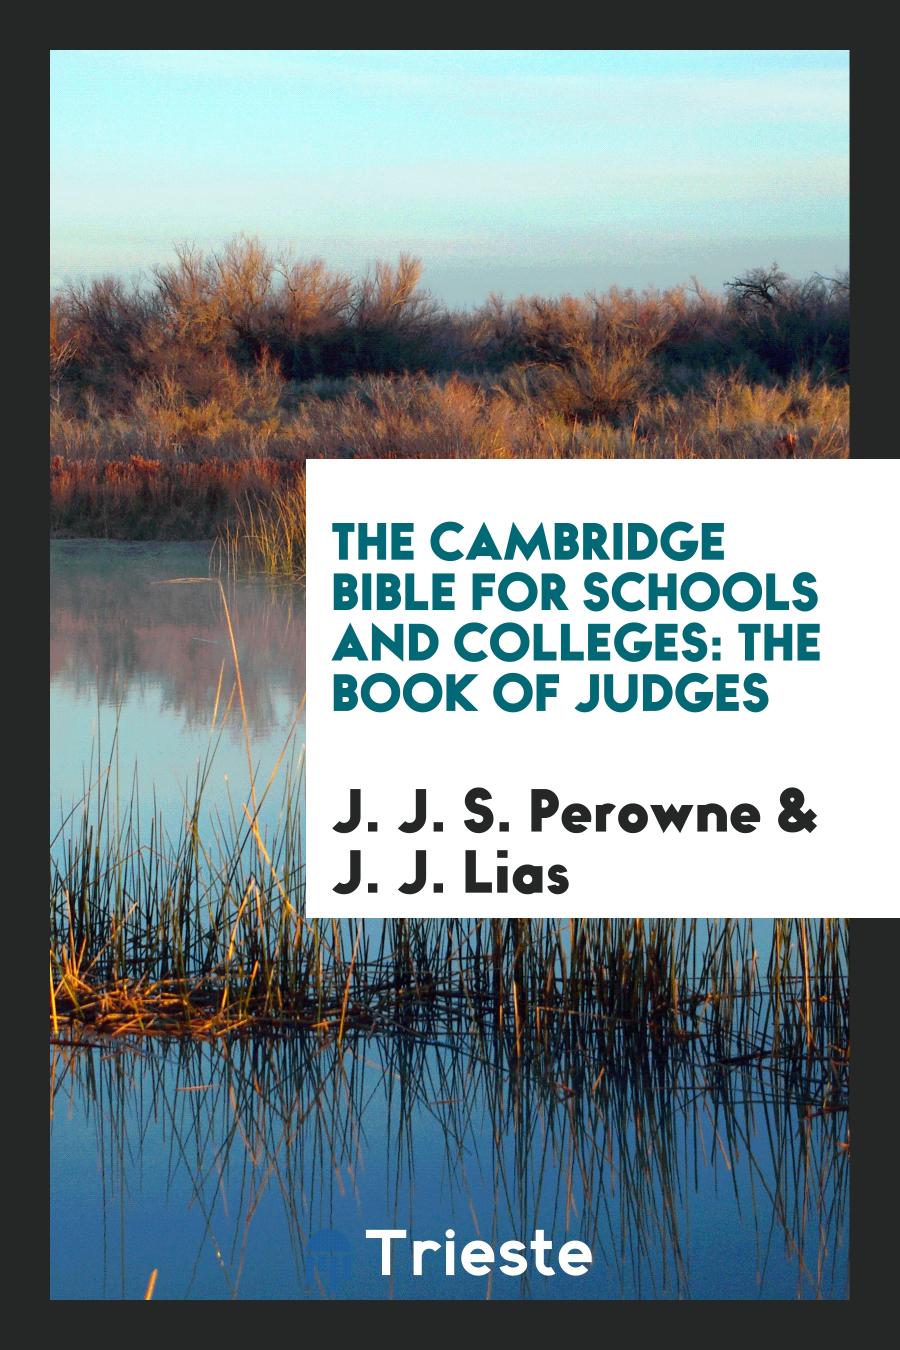 The Cambridge Bible for Schools and Colleges: The Book of Judges